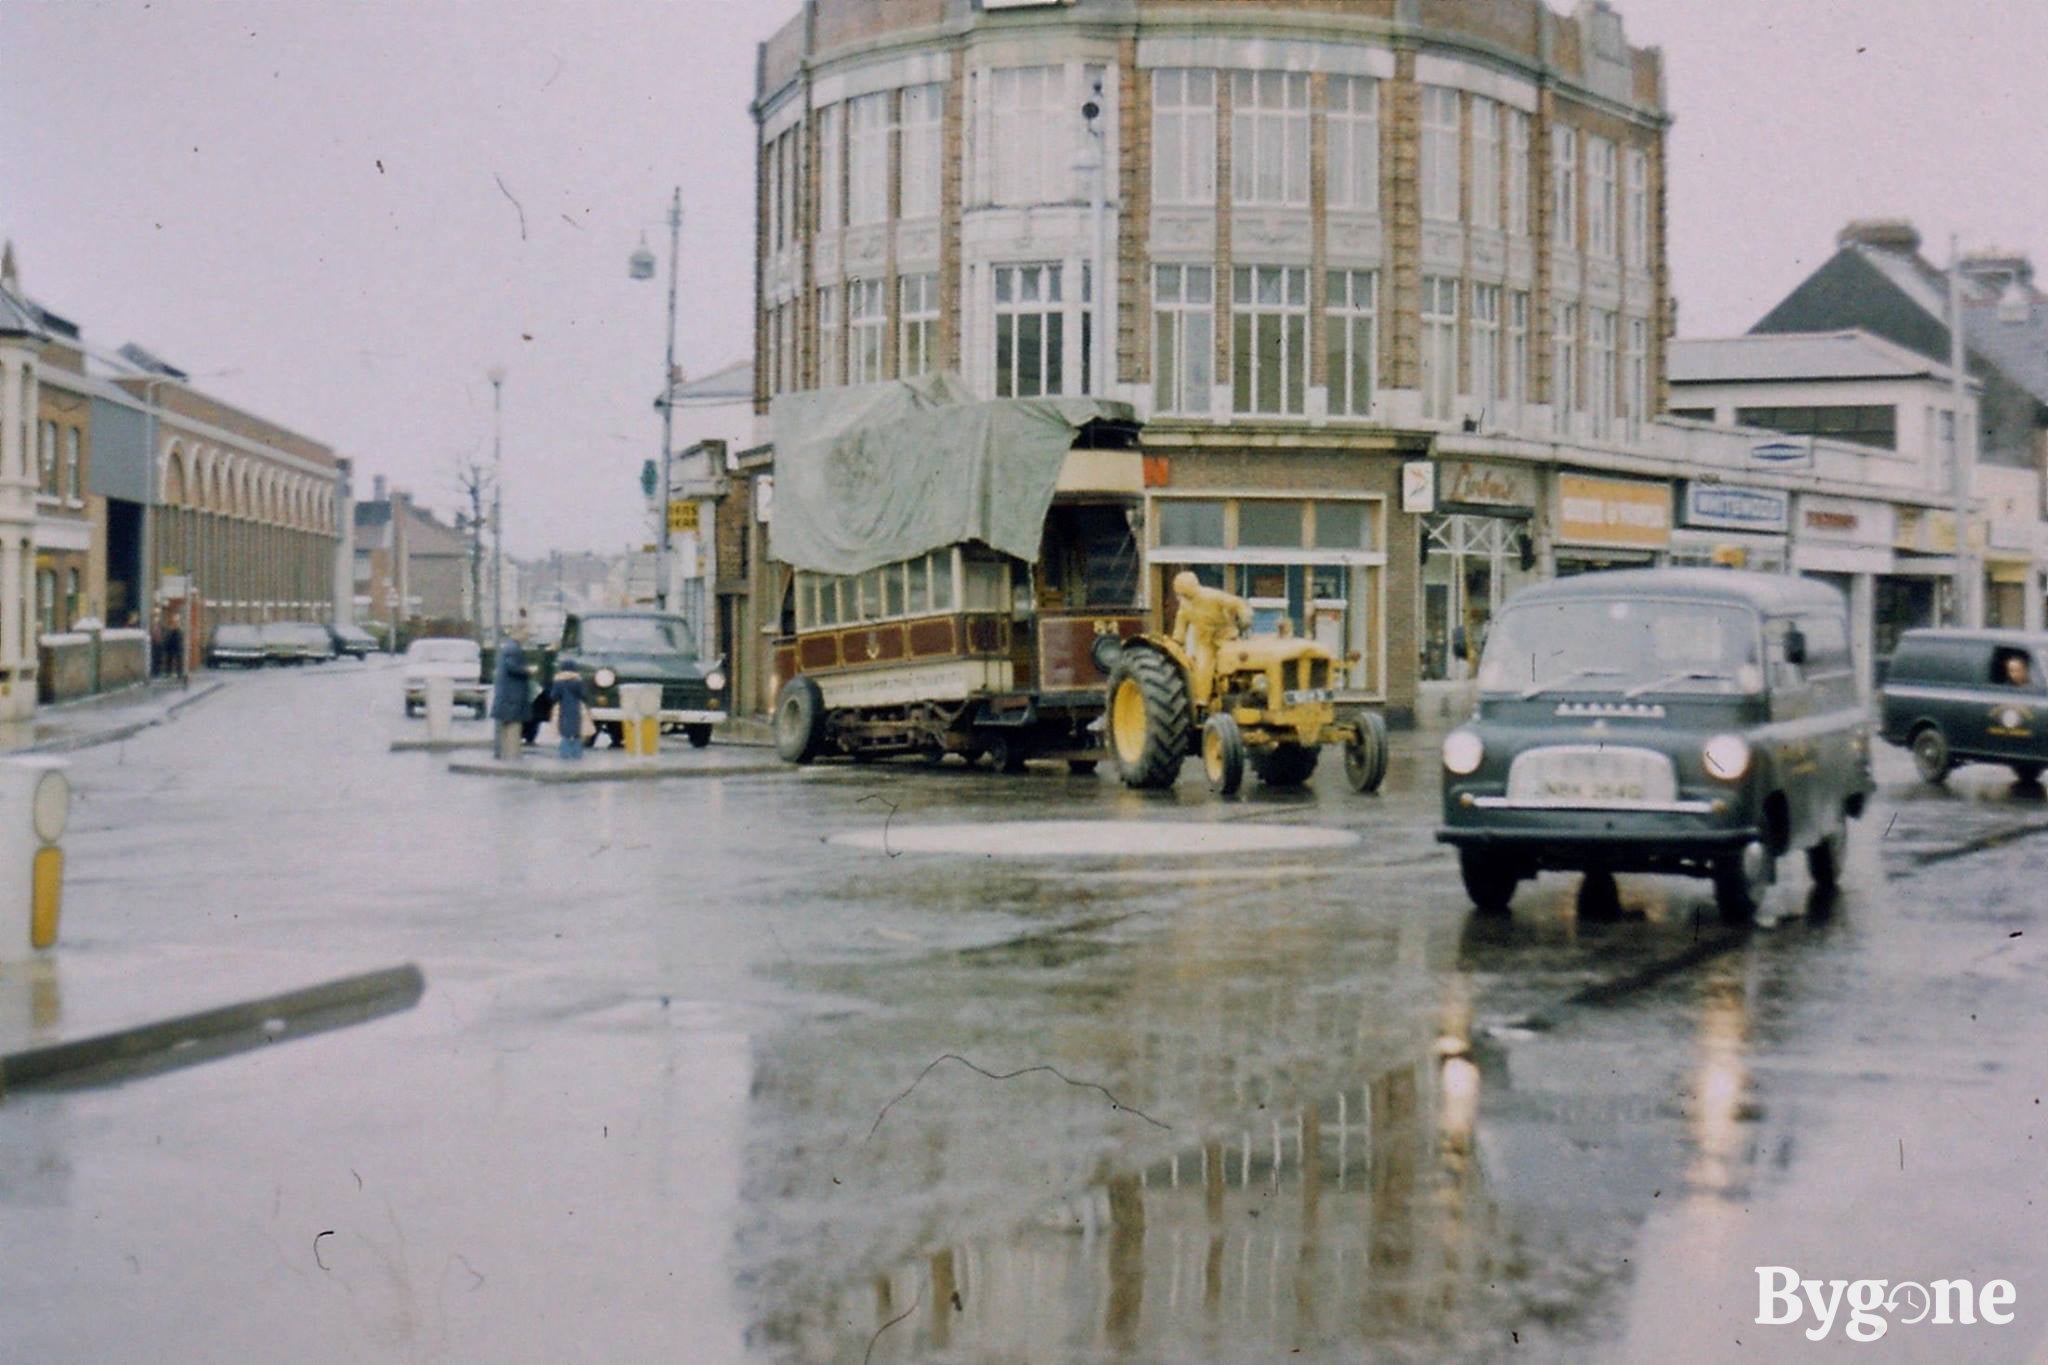 Portsmouth Tram being transported via tractor, possibly 1960s